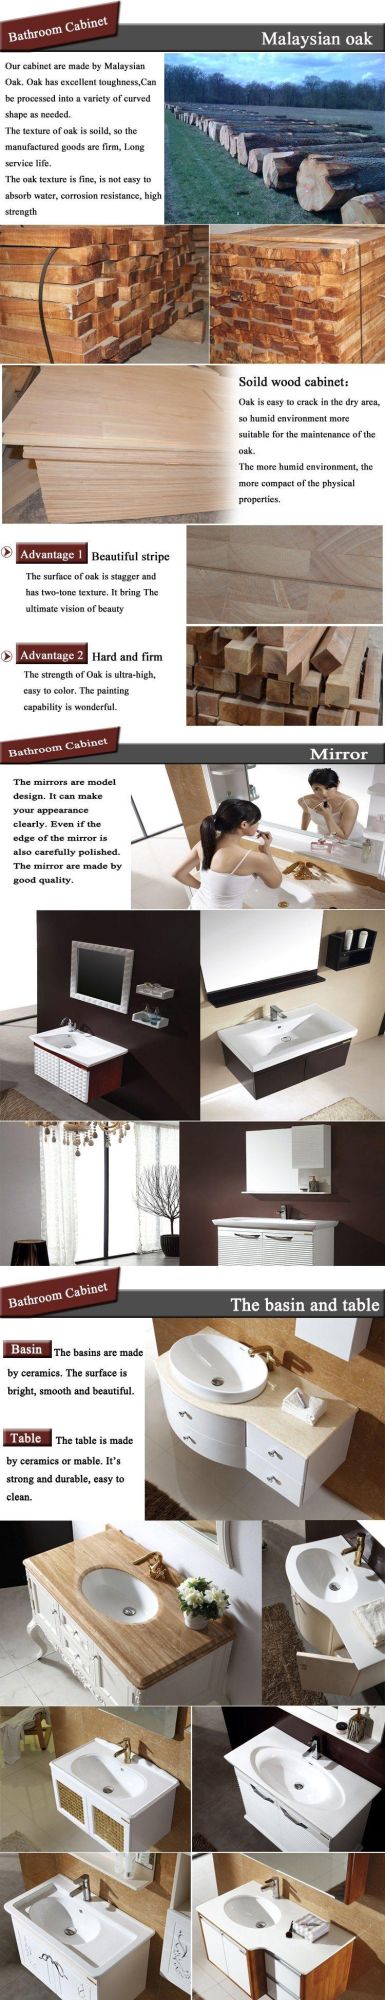 Contemporary Commercial Hotel Wall Hung Luxury Vanity Bathroom Cabinet Design